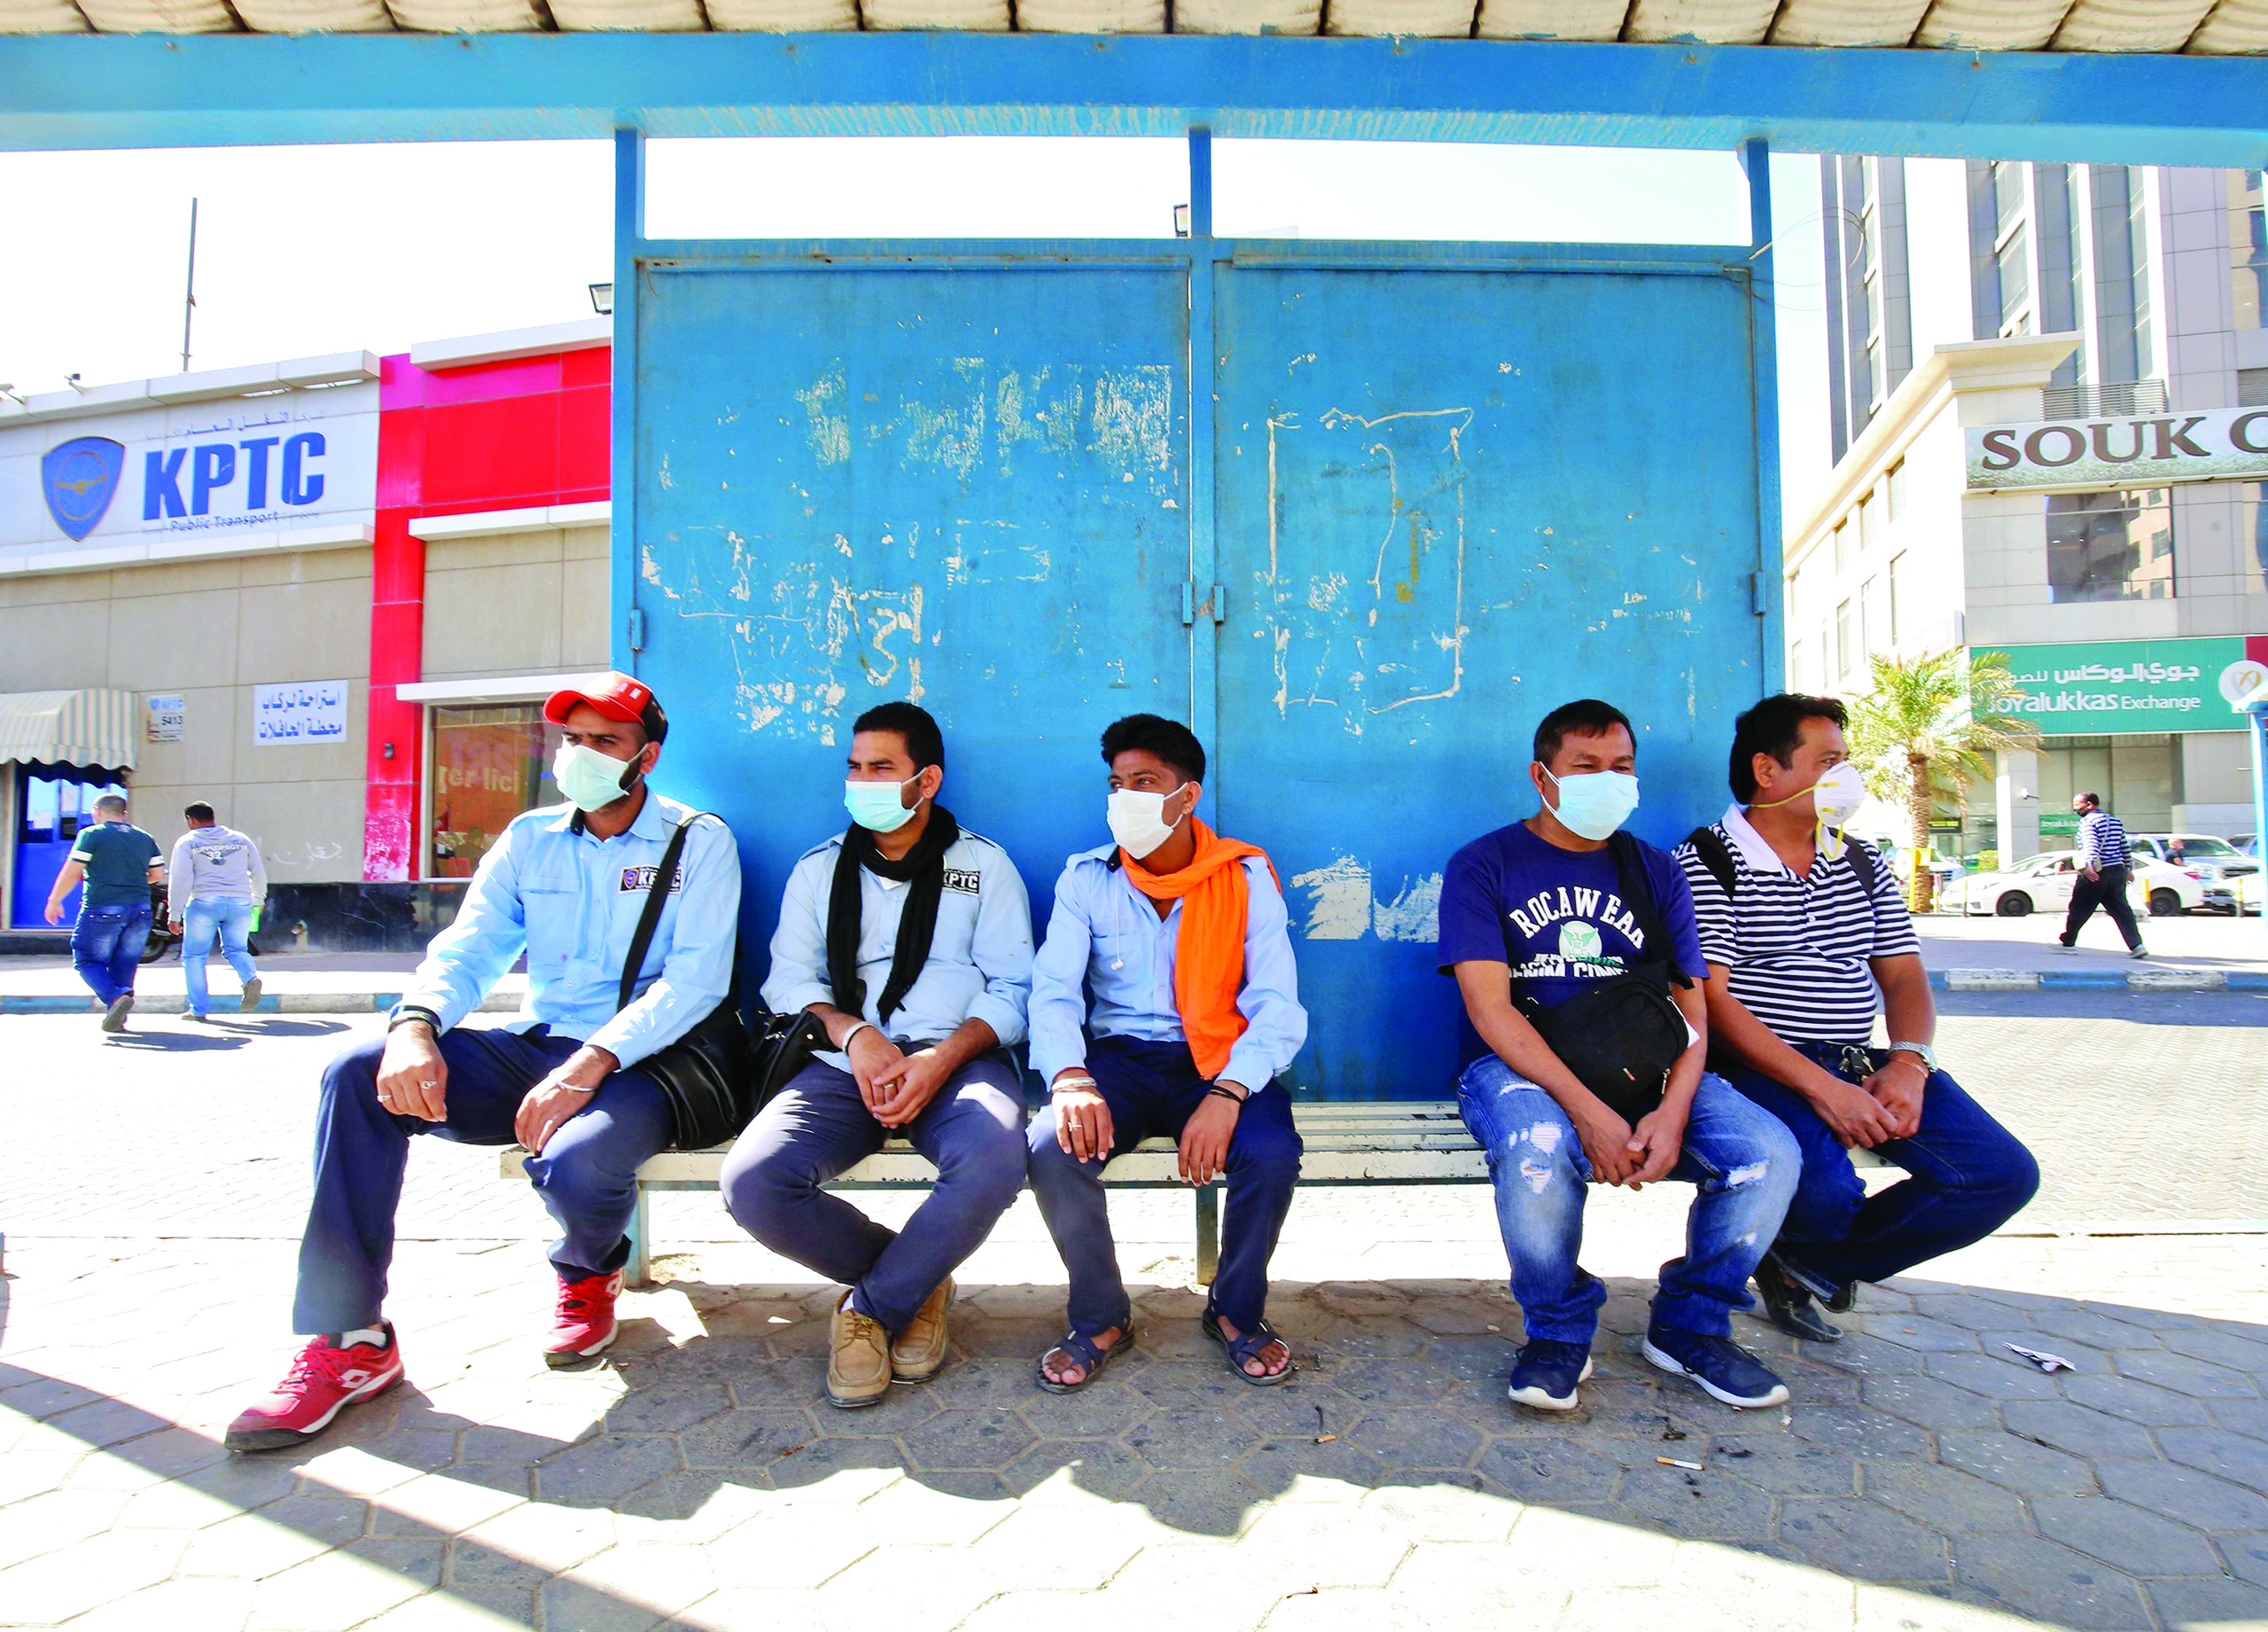 People wearing protective masks wait at a bus station in Kuwait City on March 2, 2020, amid a global outbreak of the novel Coronavirus. (Photo by YASSER AL-ZAYYAT / AFP)